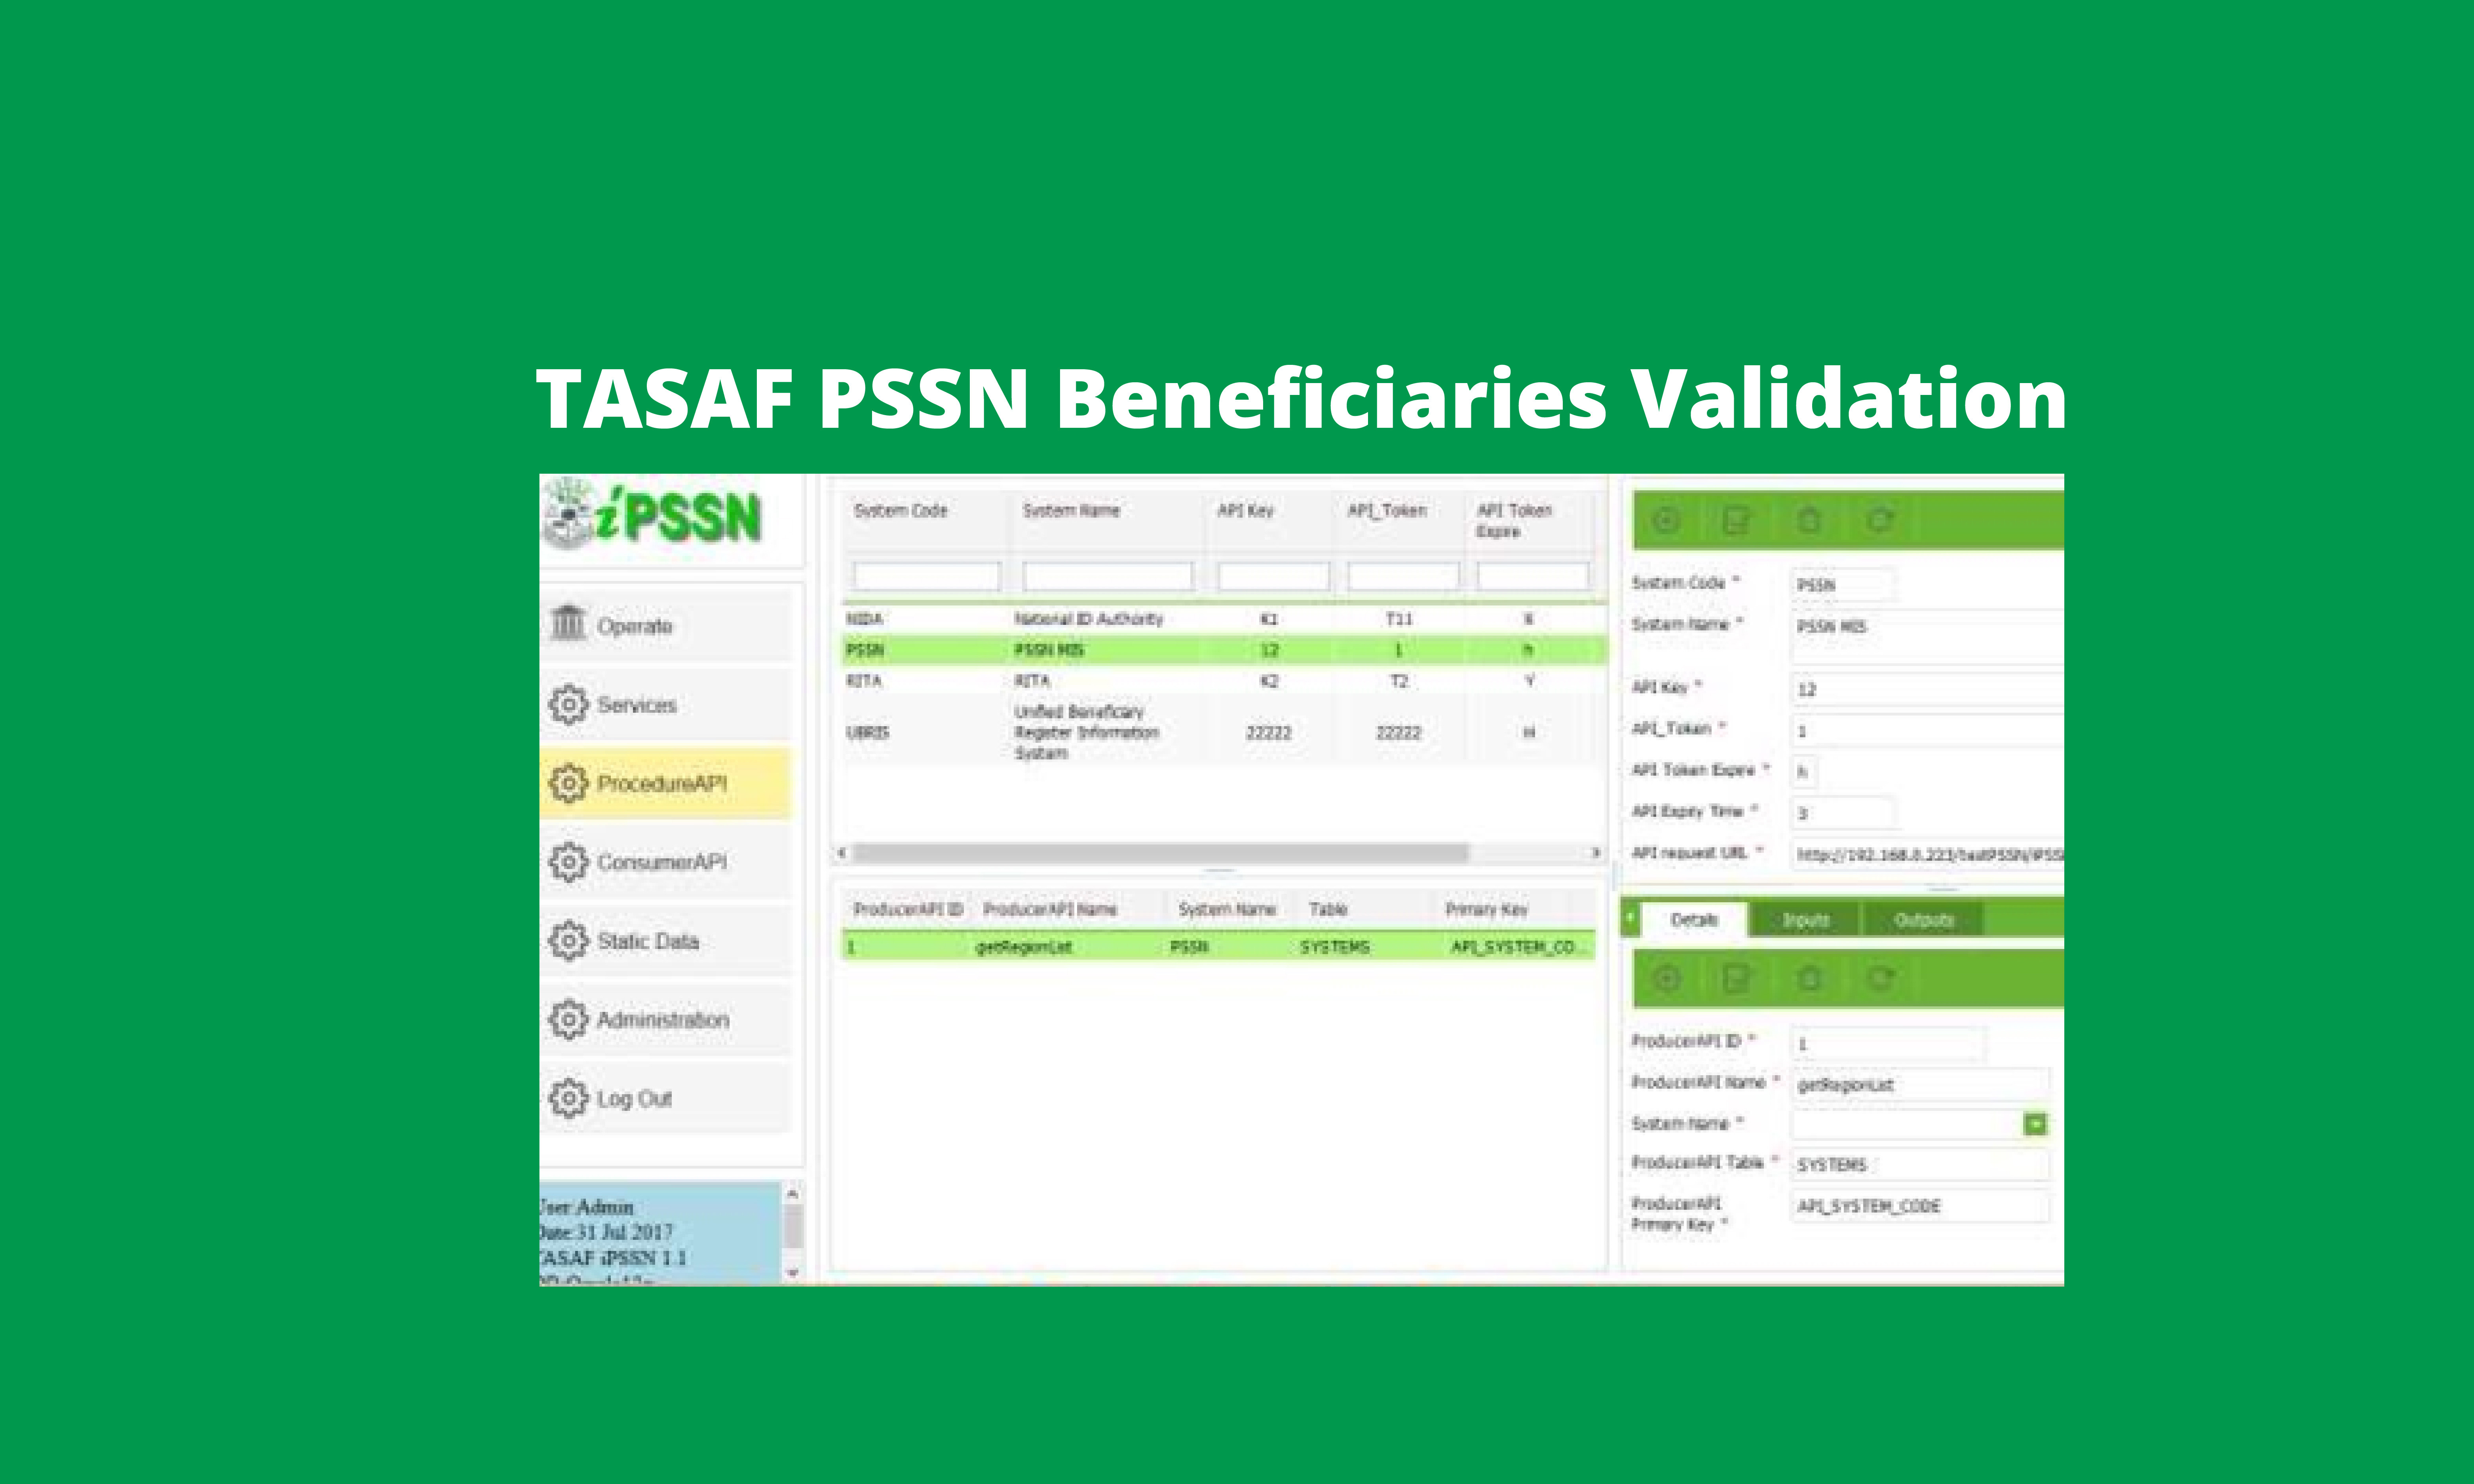 TASAF PSSN Beneficiaries Validation